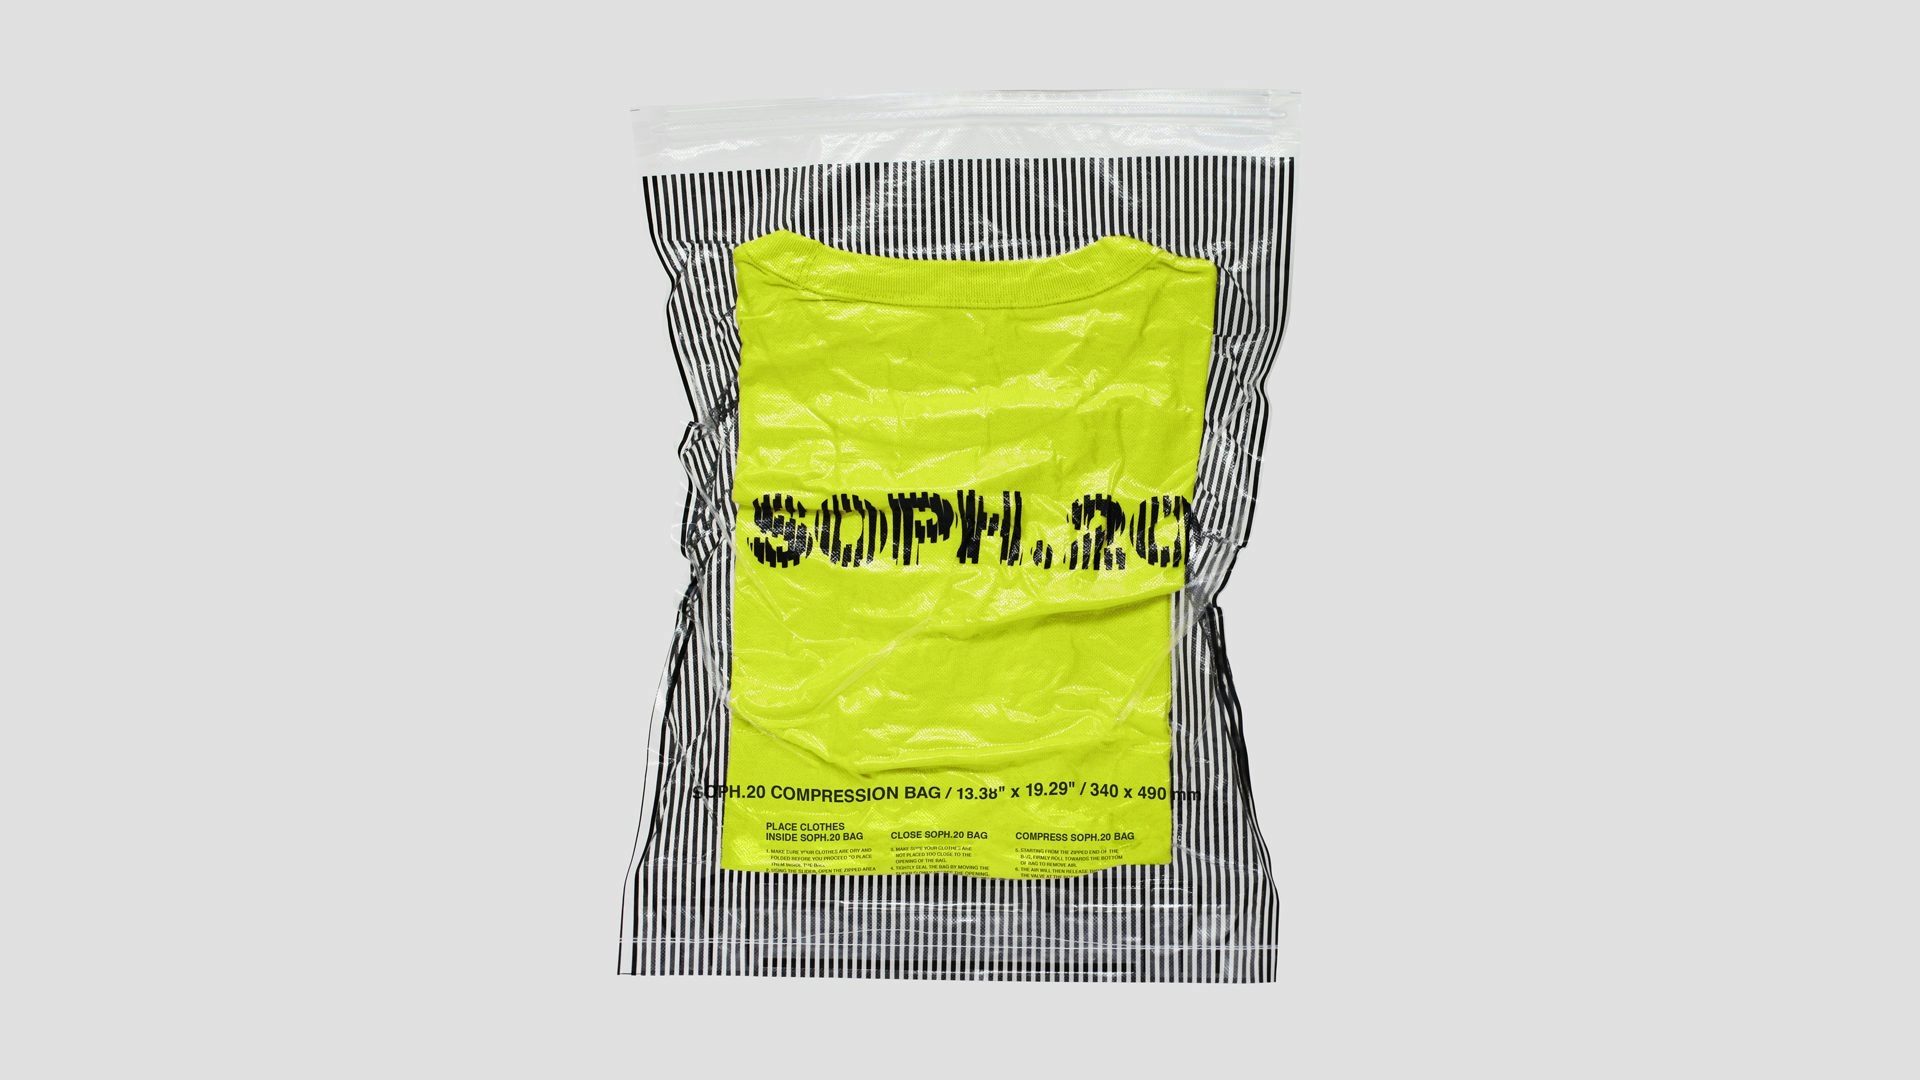 Soph.20. Brand Identity and Packaging by Hingston Studio, London